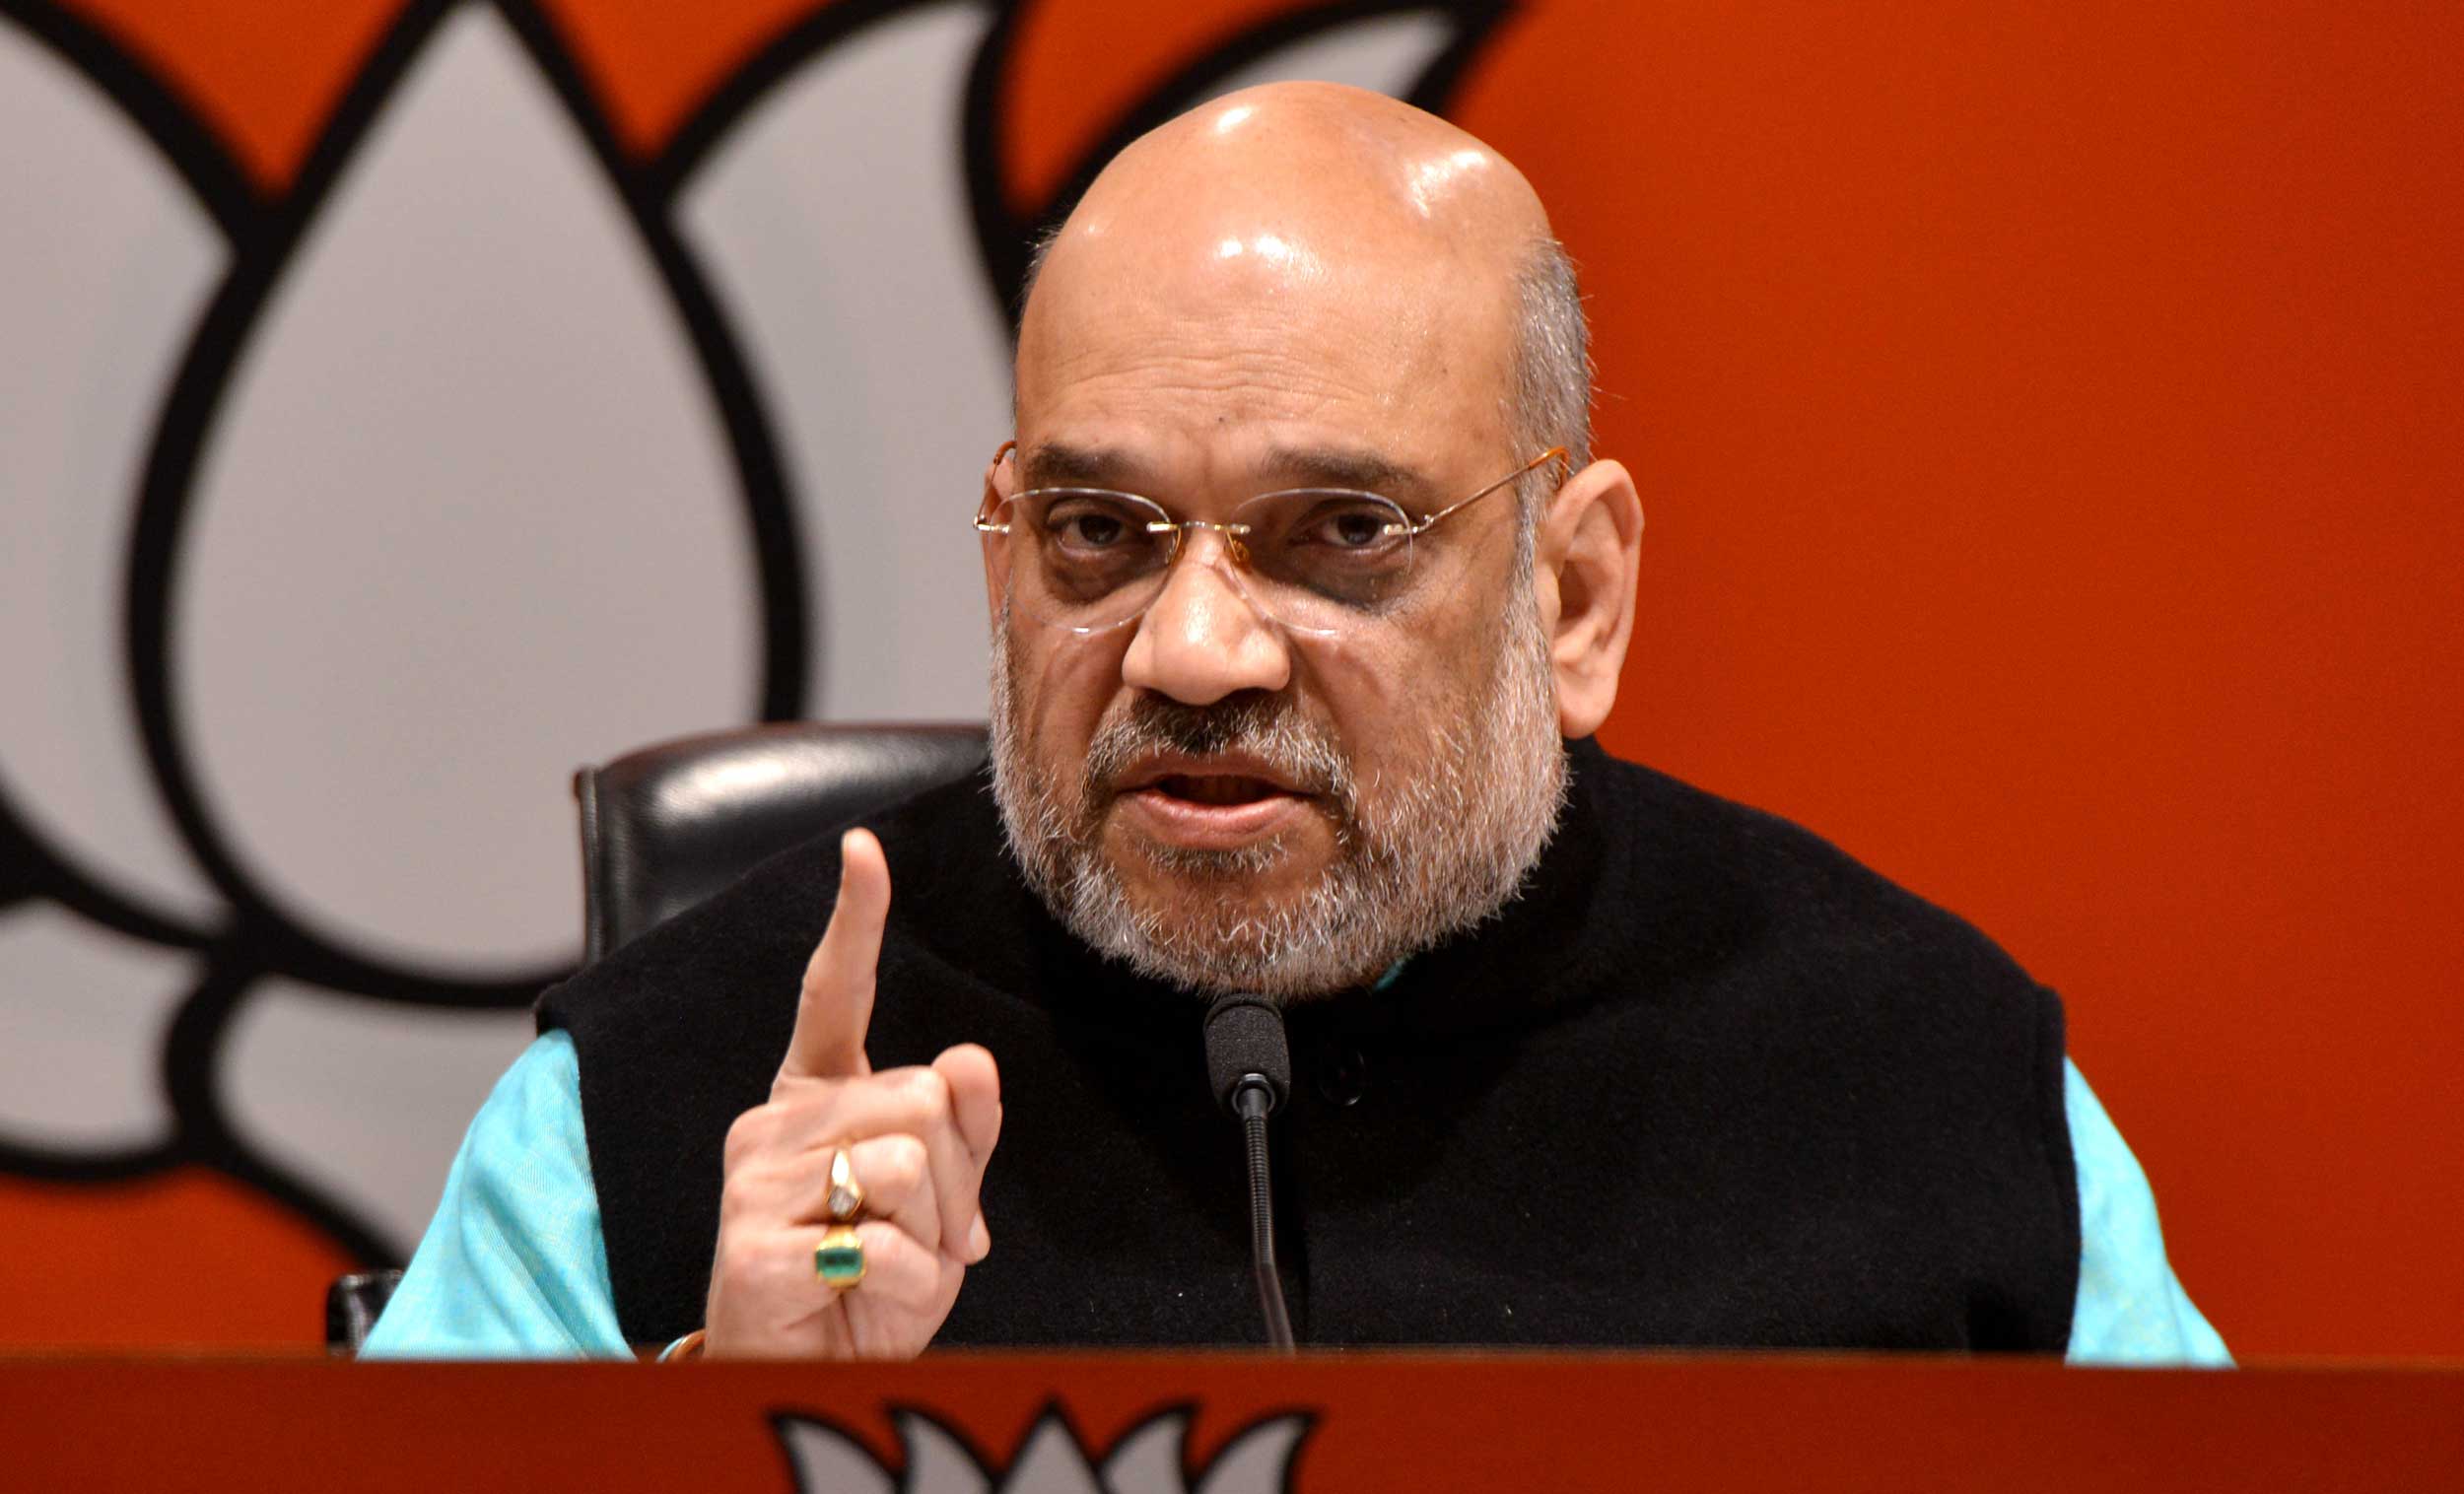 The proceedings were stopped when Amit Shah was countered by Opposition members during the introduction of the bill when the home minister stated that the rights of Assamese people would be protected by the BJP government.

